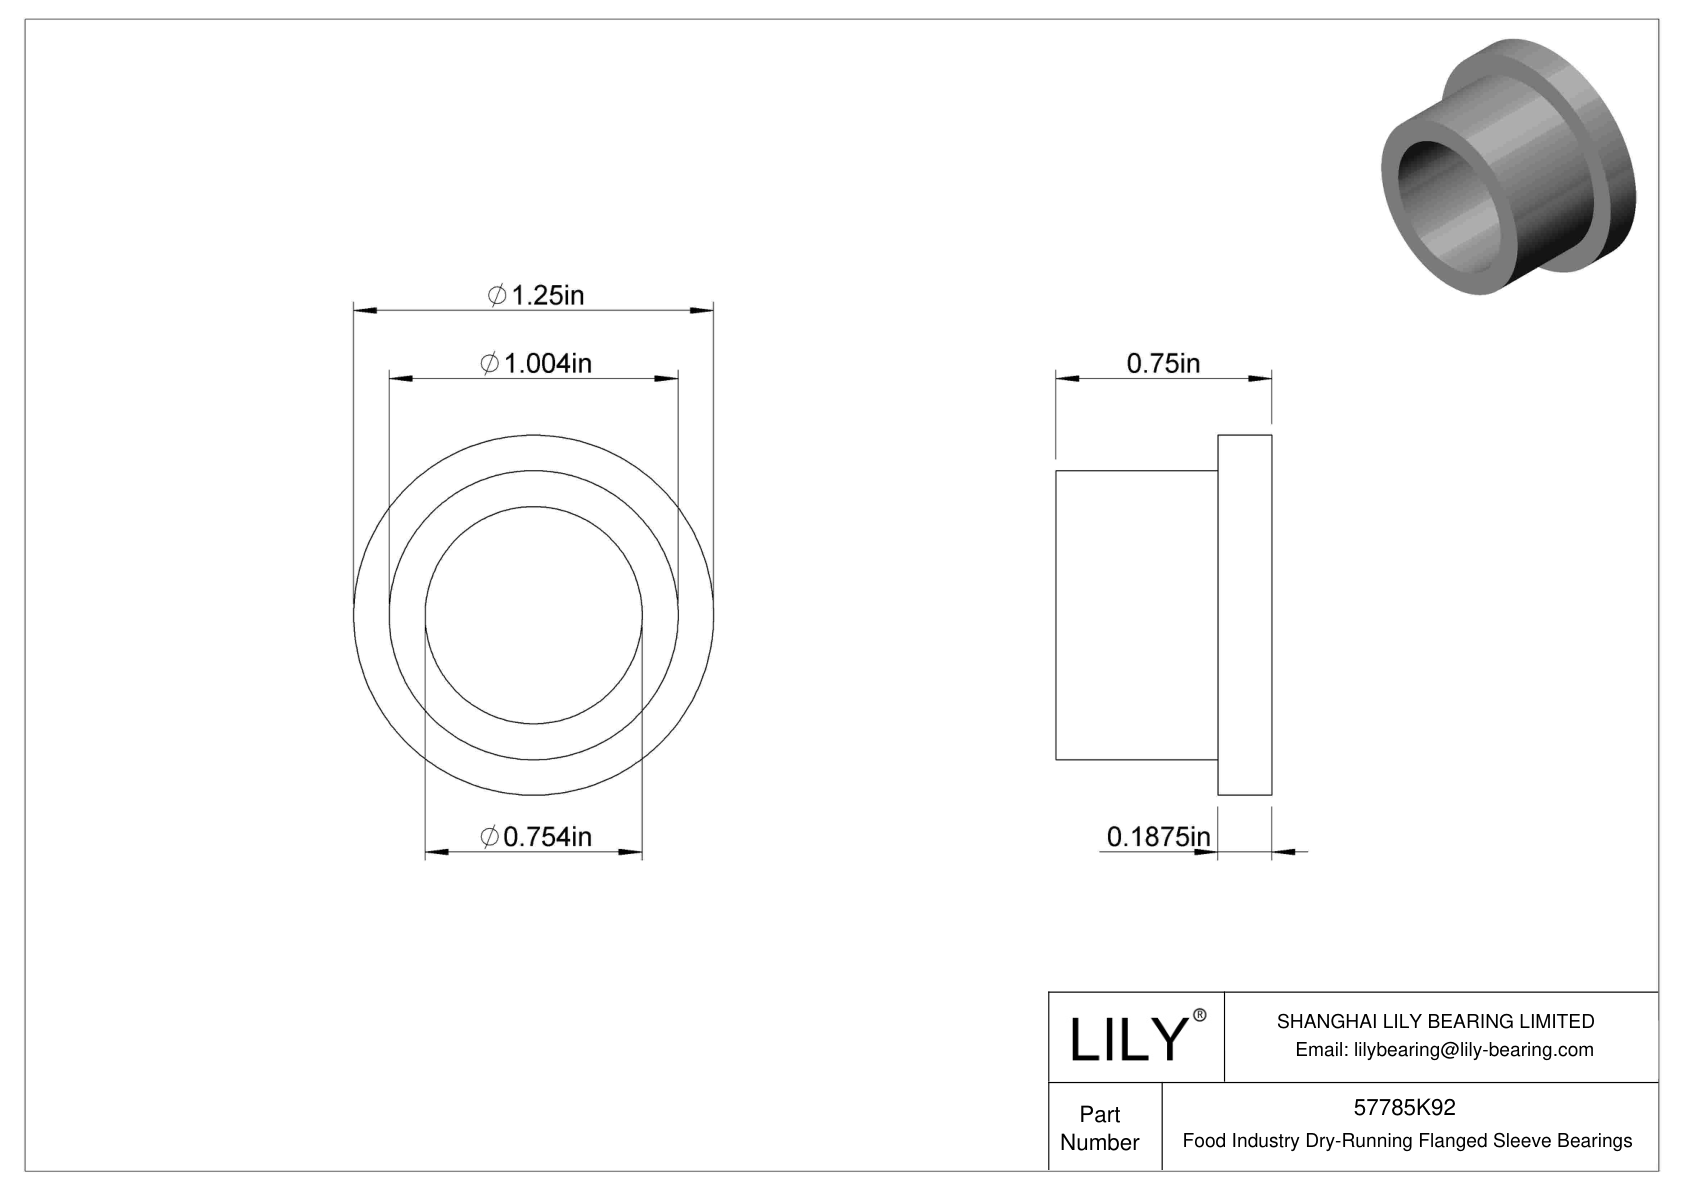 FHHIFKJC Food Industry Dry-Running Flanged Sleeve Bearings cad drawing